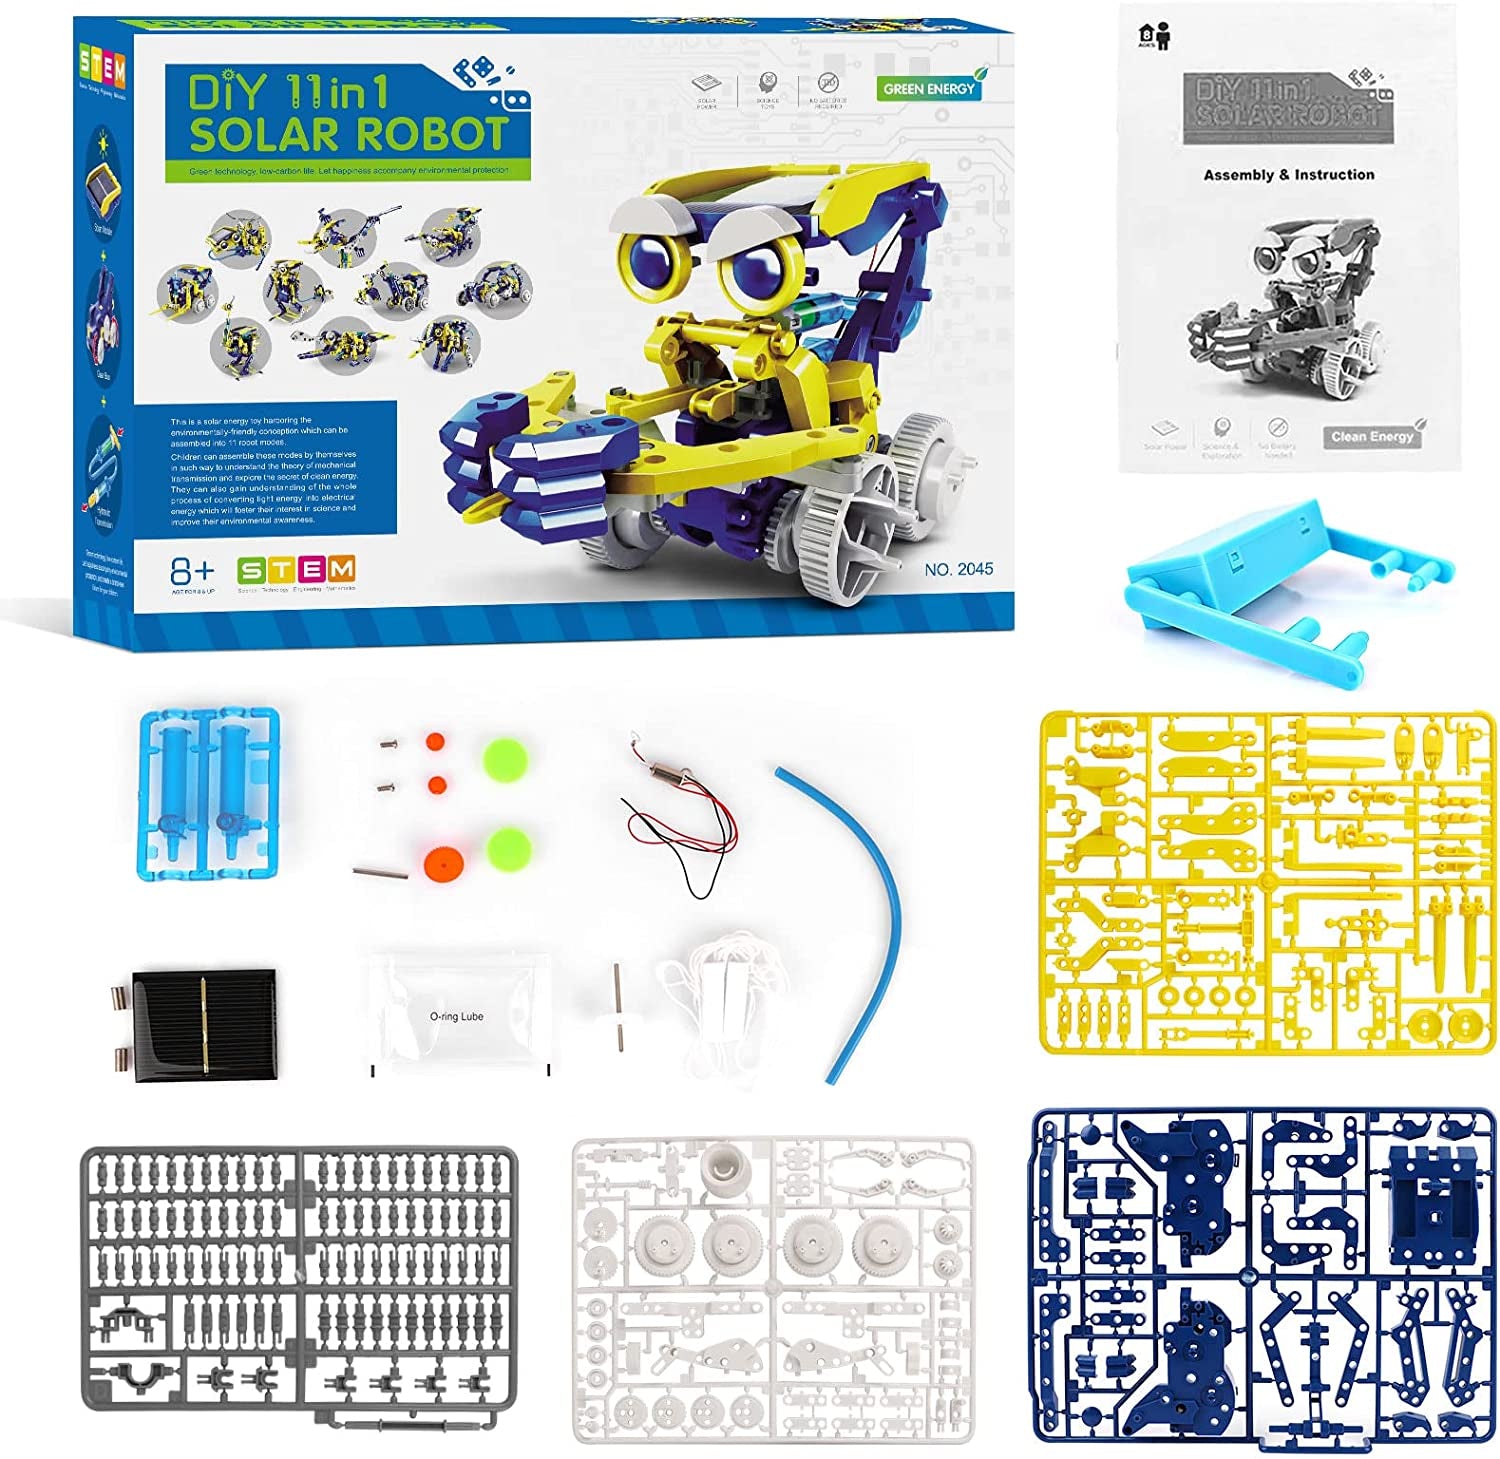 Projects for Kids Ages 8-12, Solor Robot Kits with Unique LED Light Educational Building Toys, Science Experiment Kit Gift for Boys 8 9 10 11 12 Years Old